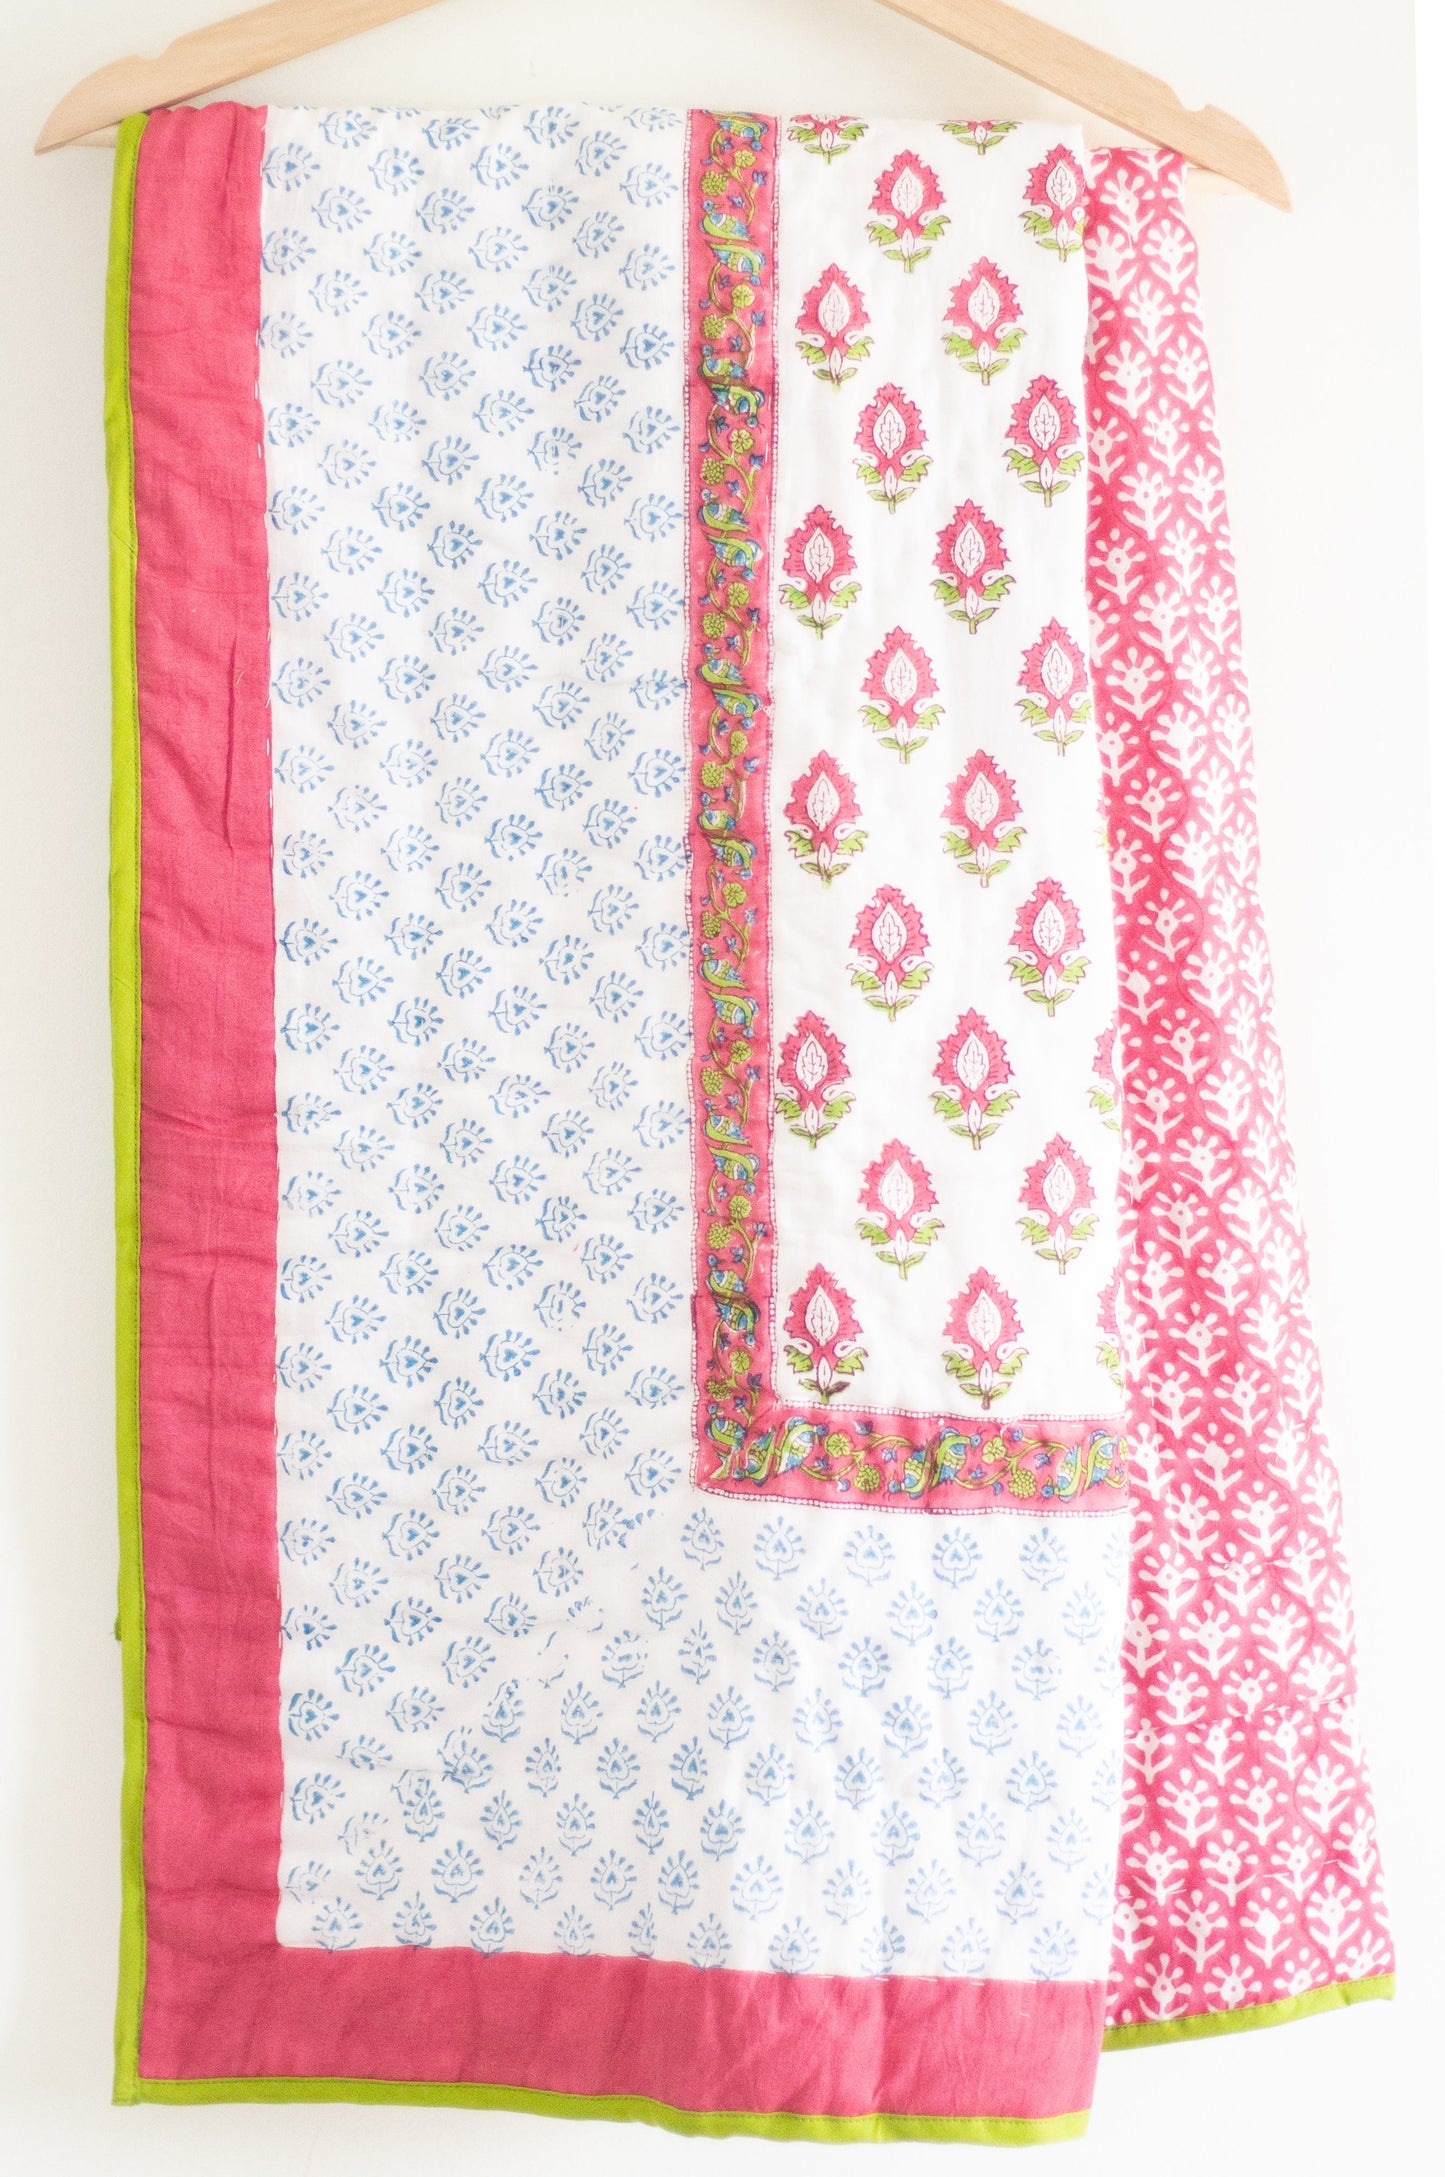 Boho Pink quilt - Baby size - 36x48 inches